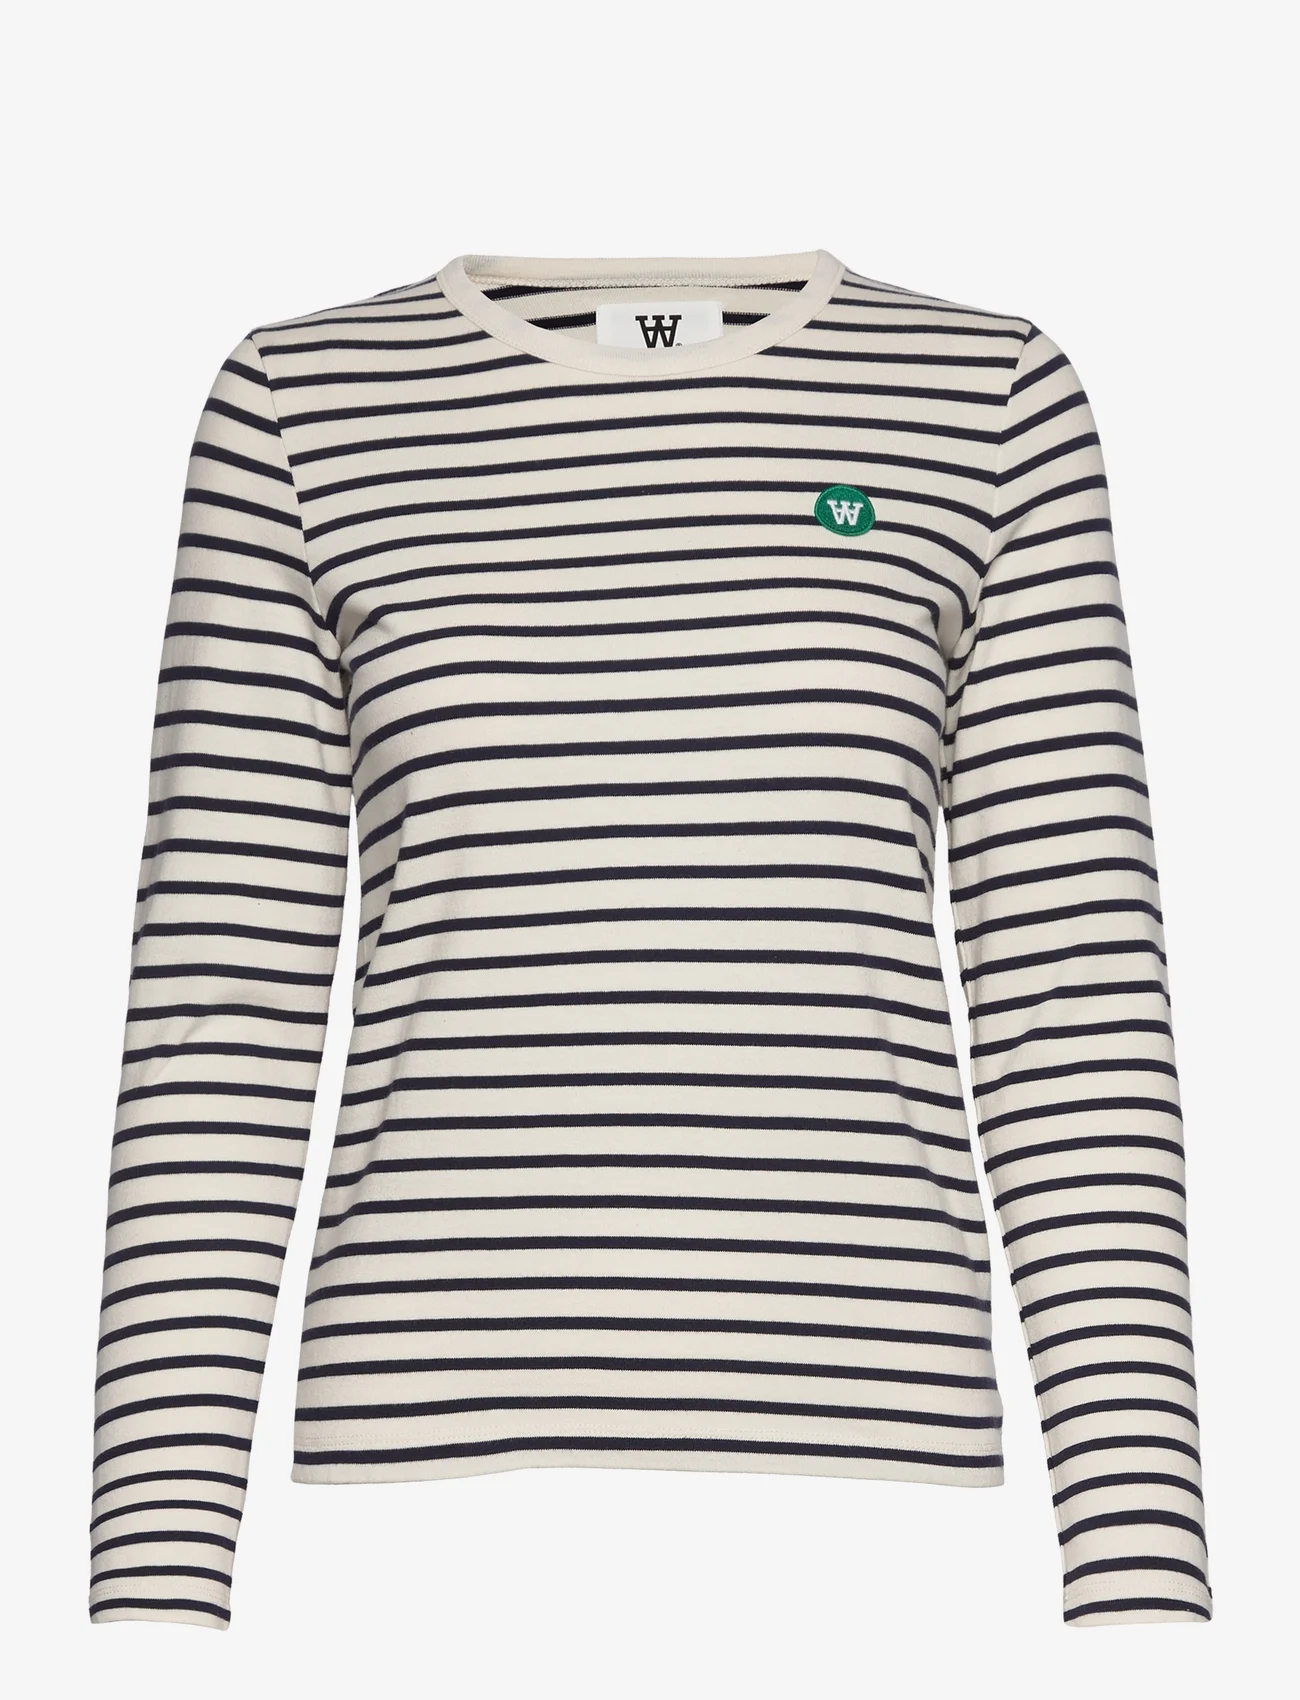 Double A by Wood Wood - Moa stripe long sleeve GOTS - langærmede toppe - off-white/navy stripes - 0